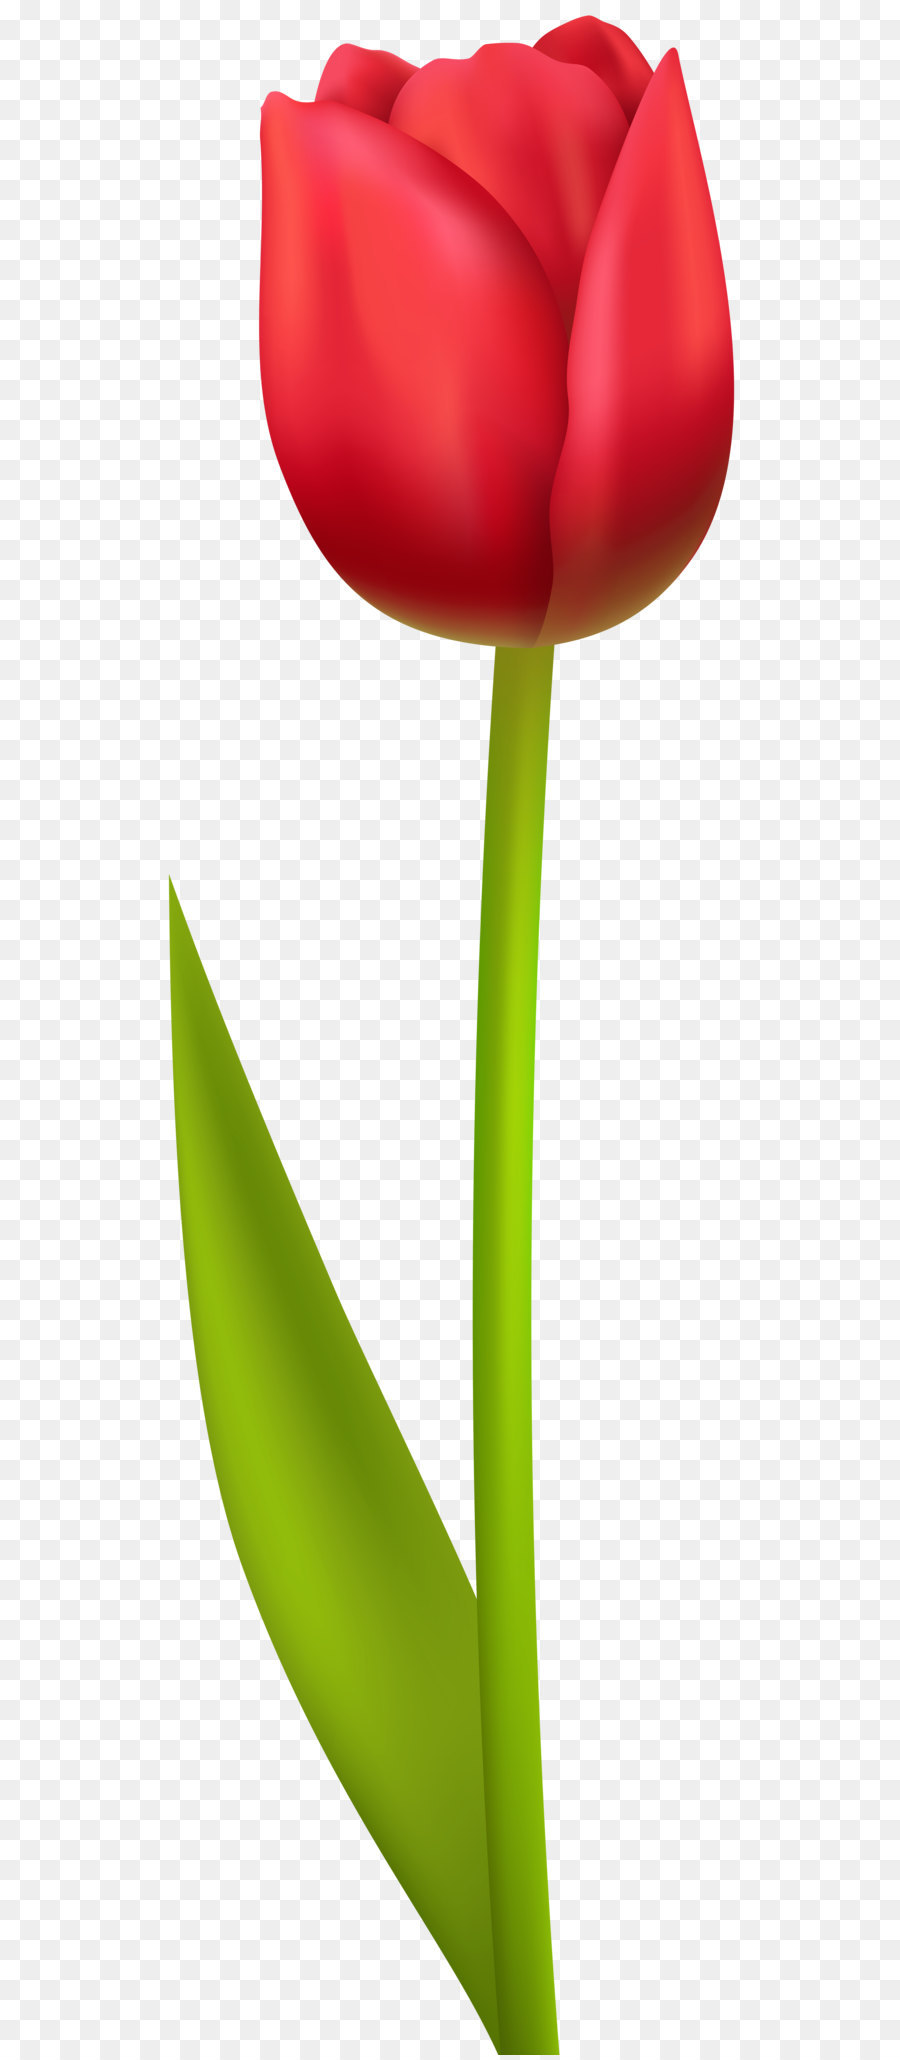 May clipart red tulip. Flowers background png download